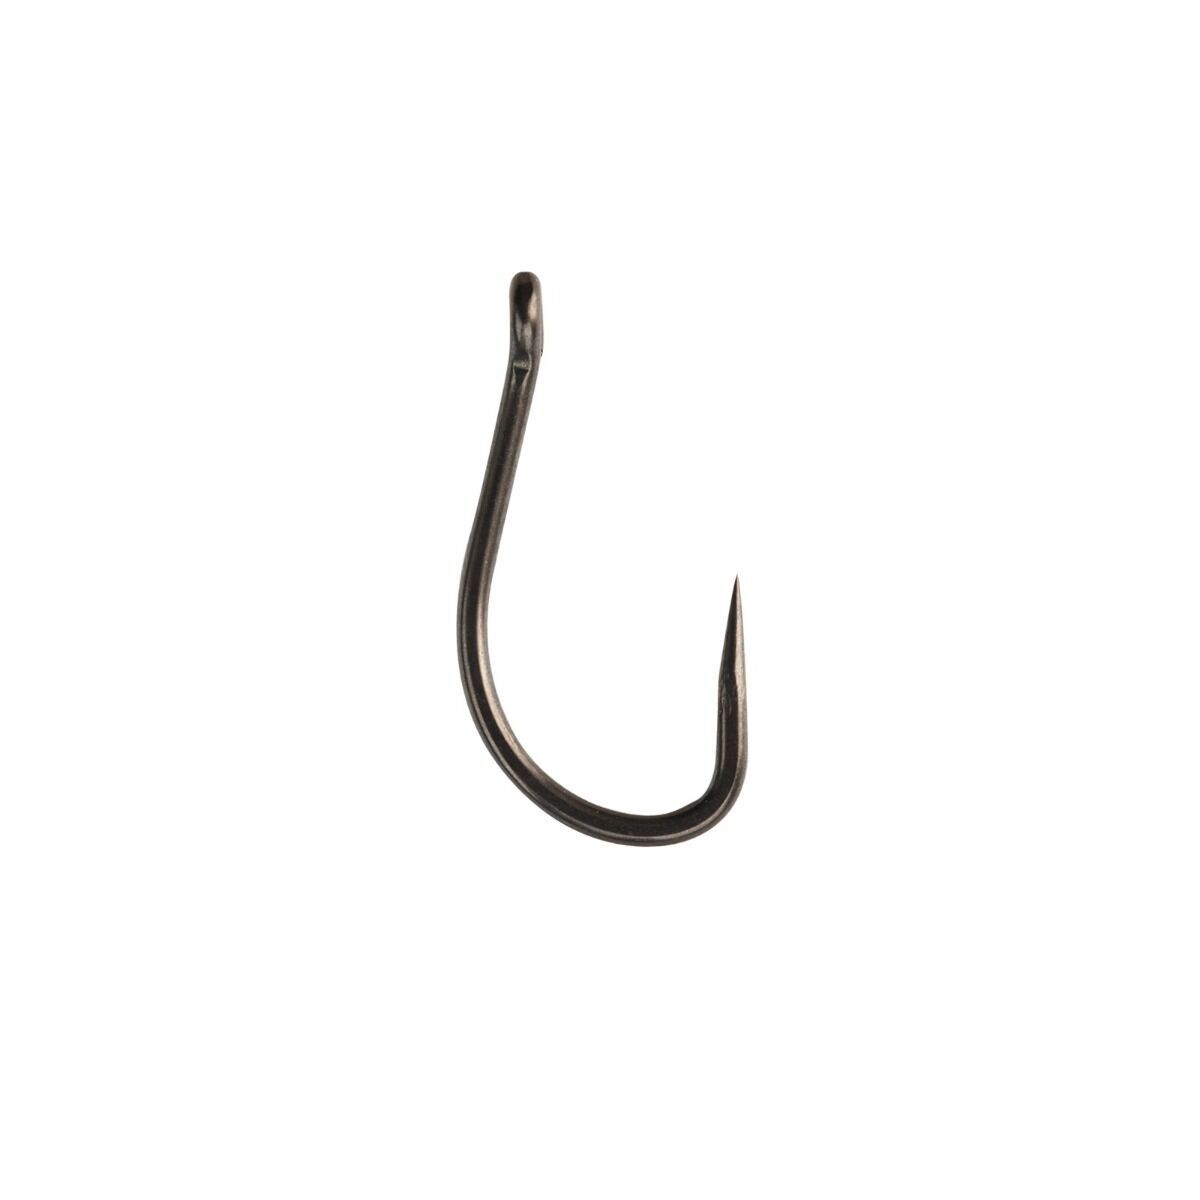 https://www.total-fishing-tackle.com/media/catalog/product/cache/c4fc4656f1ace5fcc9cefe1458e45406/t/h/thinking-anglers-out-turned-eye-hooks-barbless_3.jpg